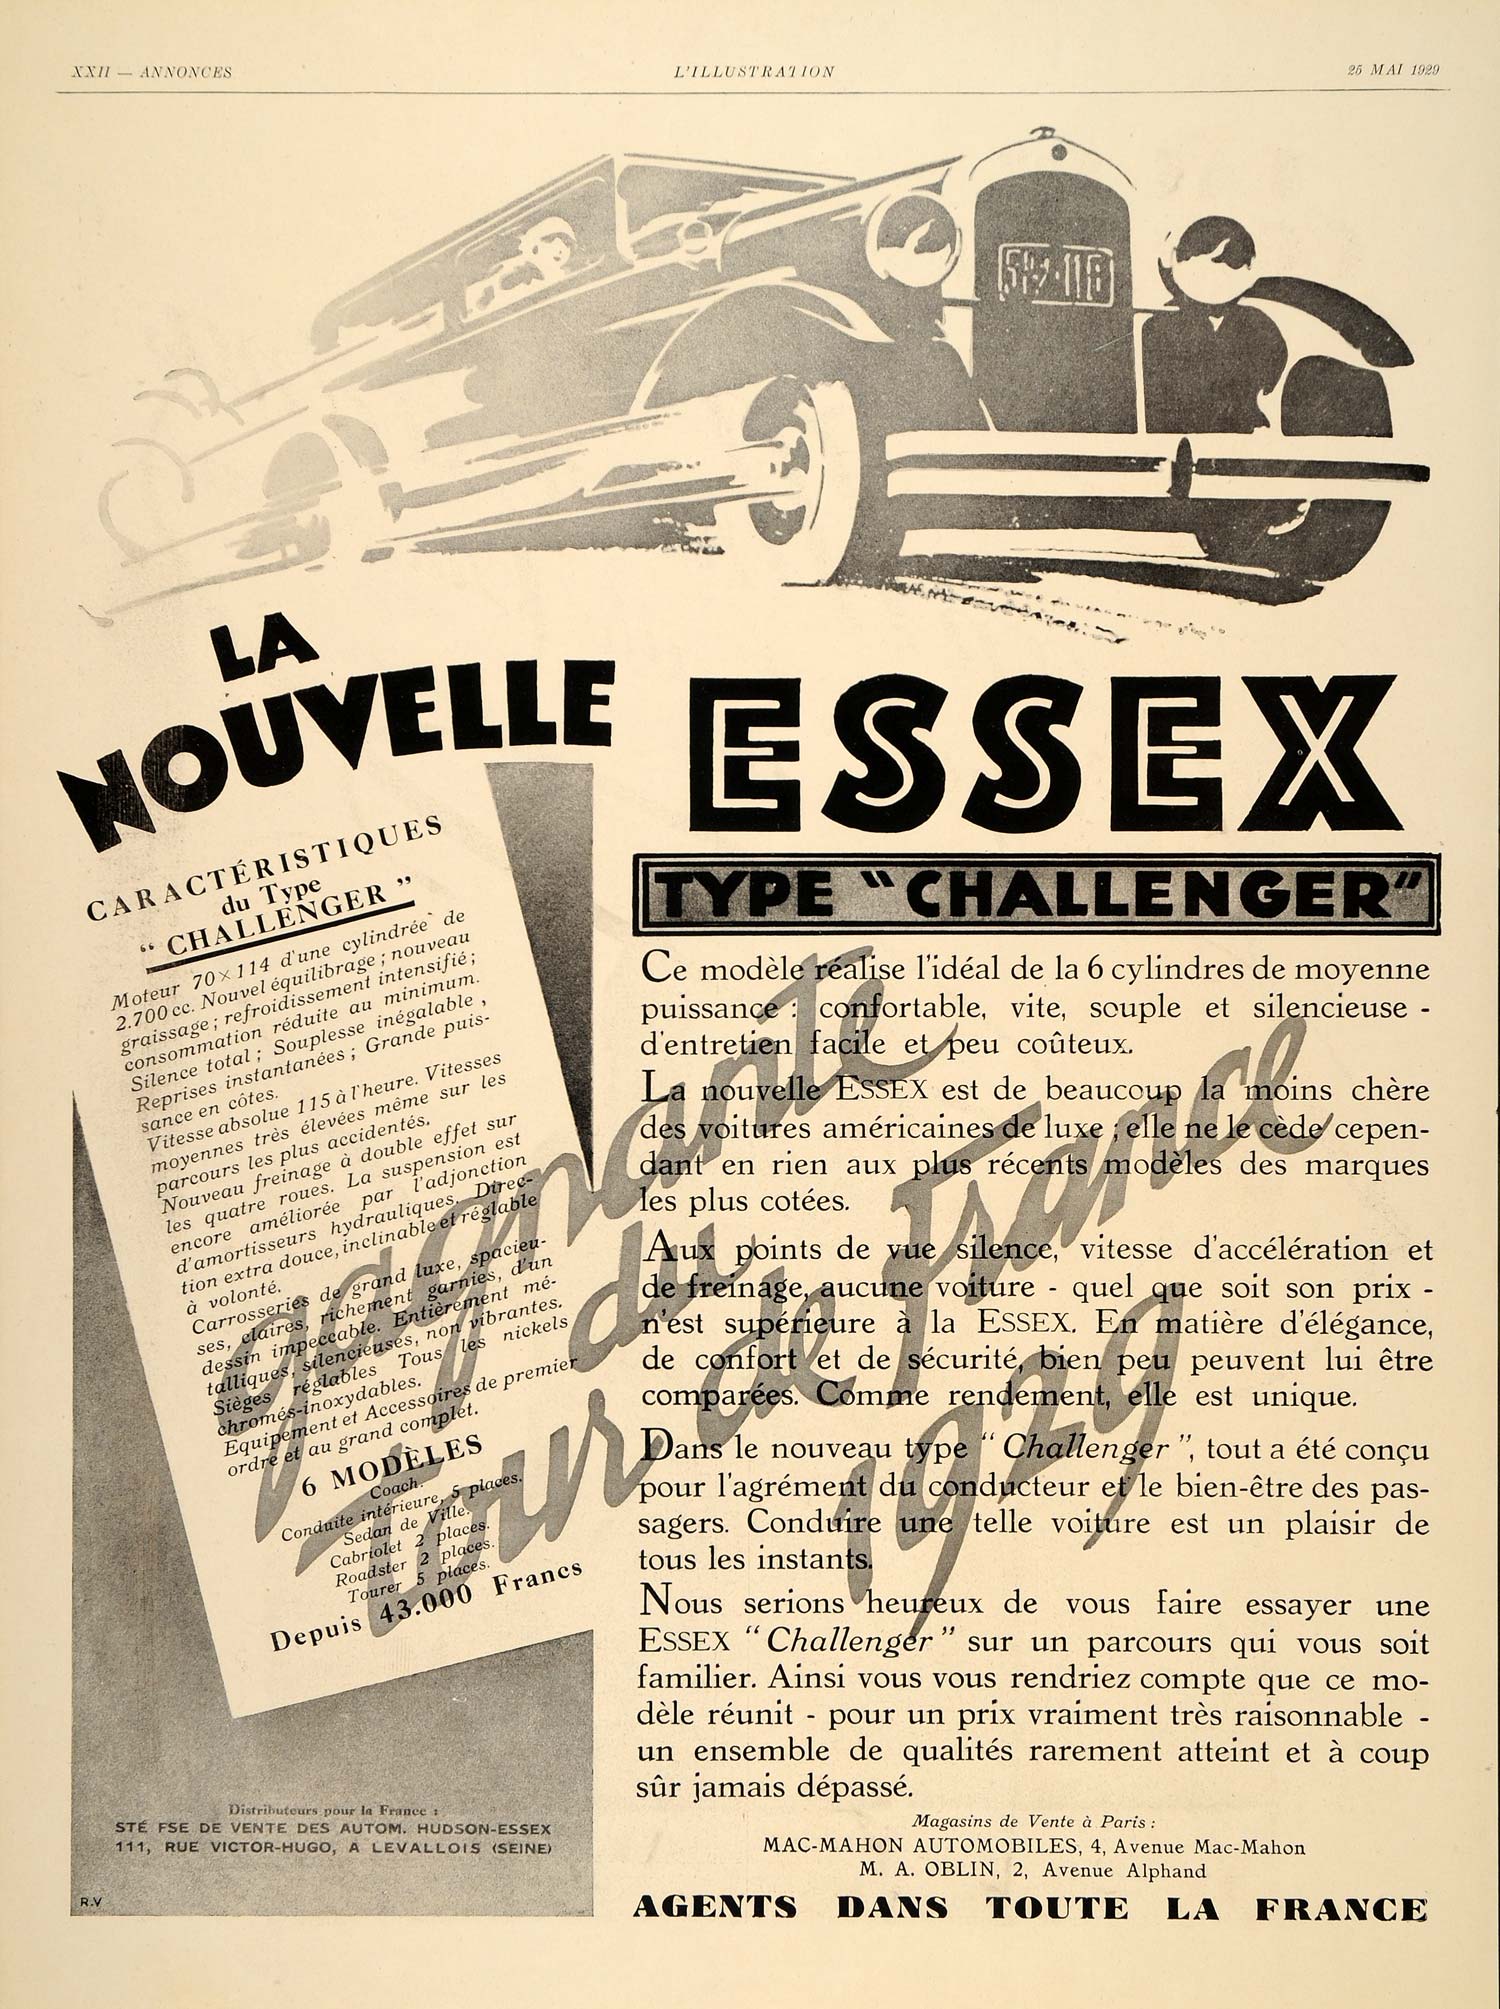 1929 Ad French Essex Challenger Cars Automobiles Racing - ORIGINAL ILL3